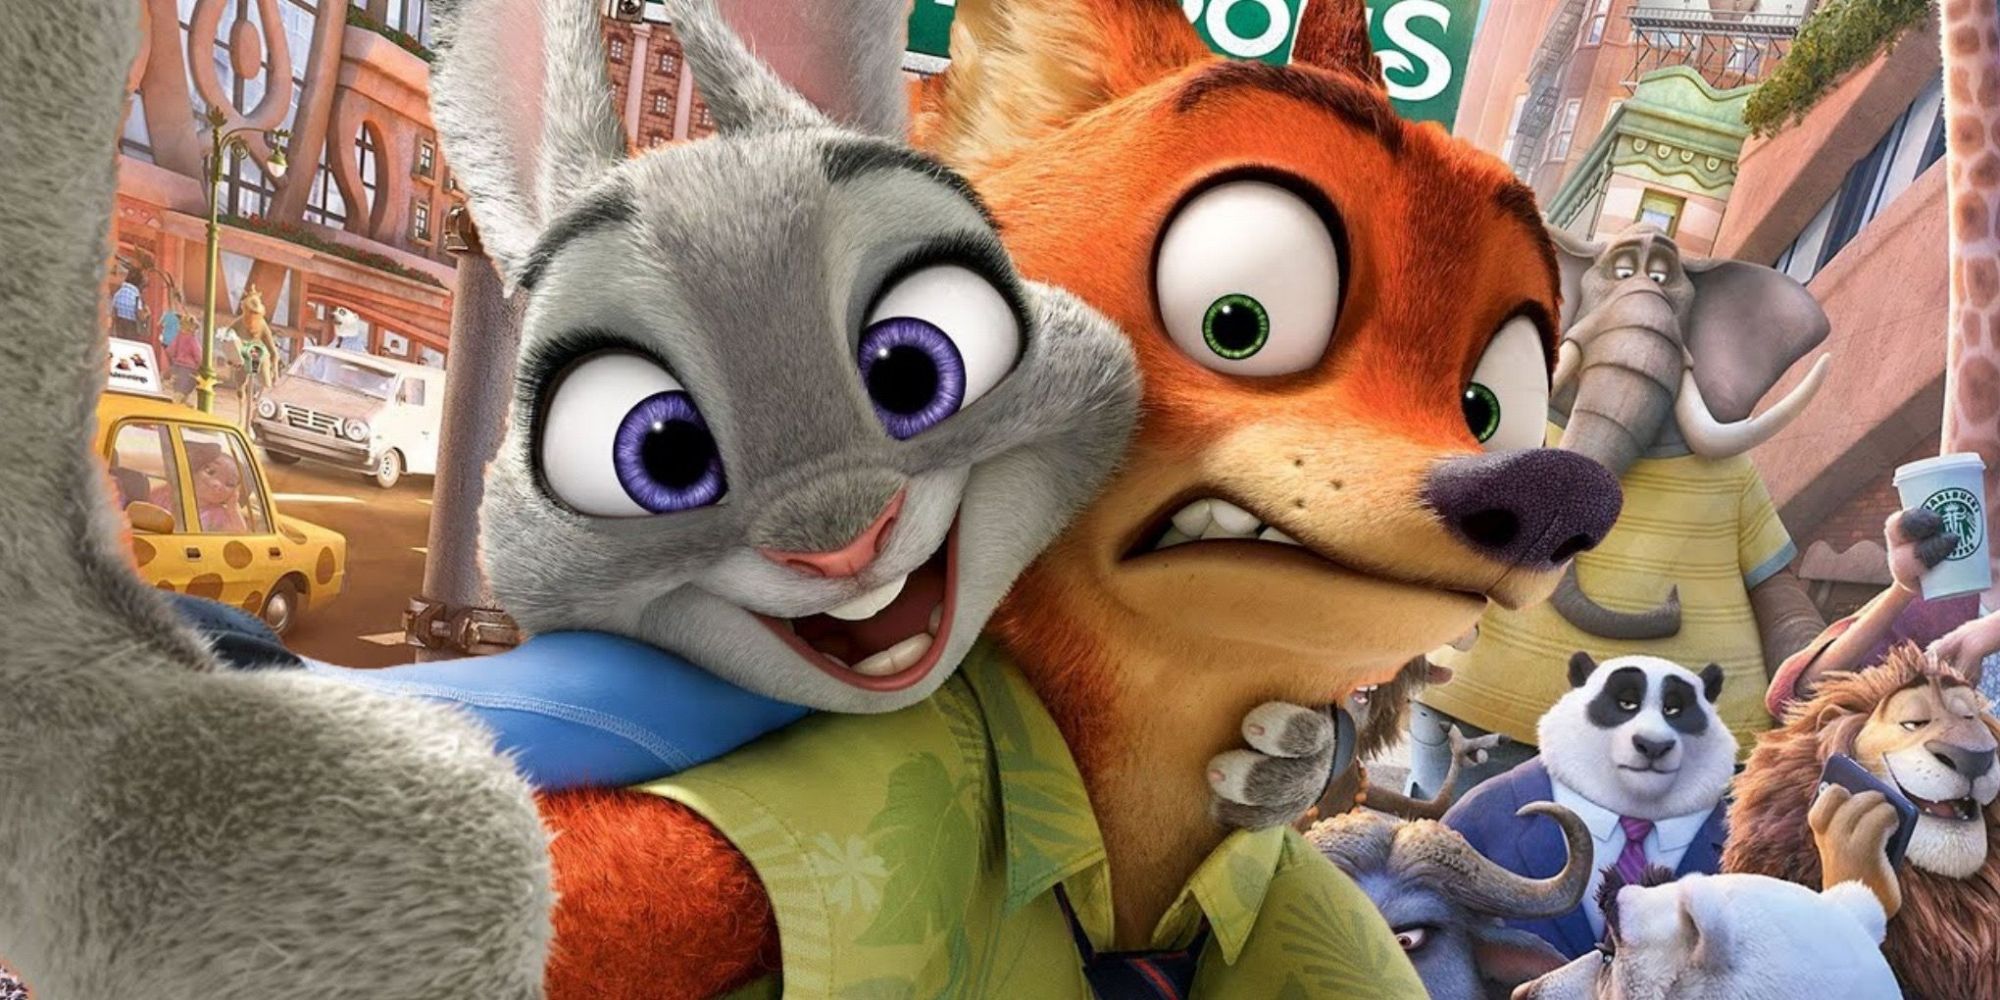 Zootopia 2 Gets Encouraging Update From Producer 7 Years After Disney’s B Hit: “Take It To Another Level”